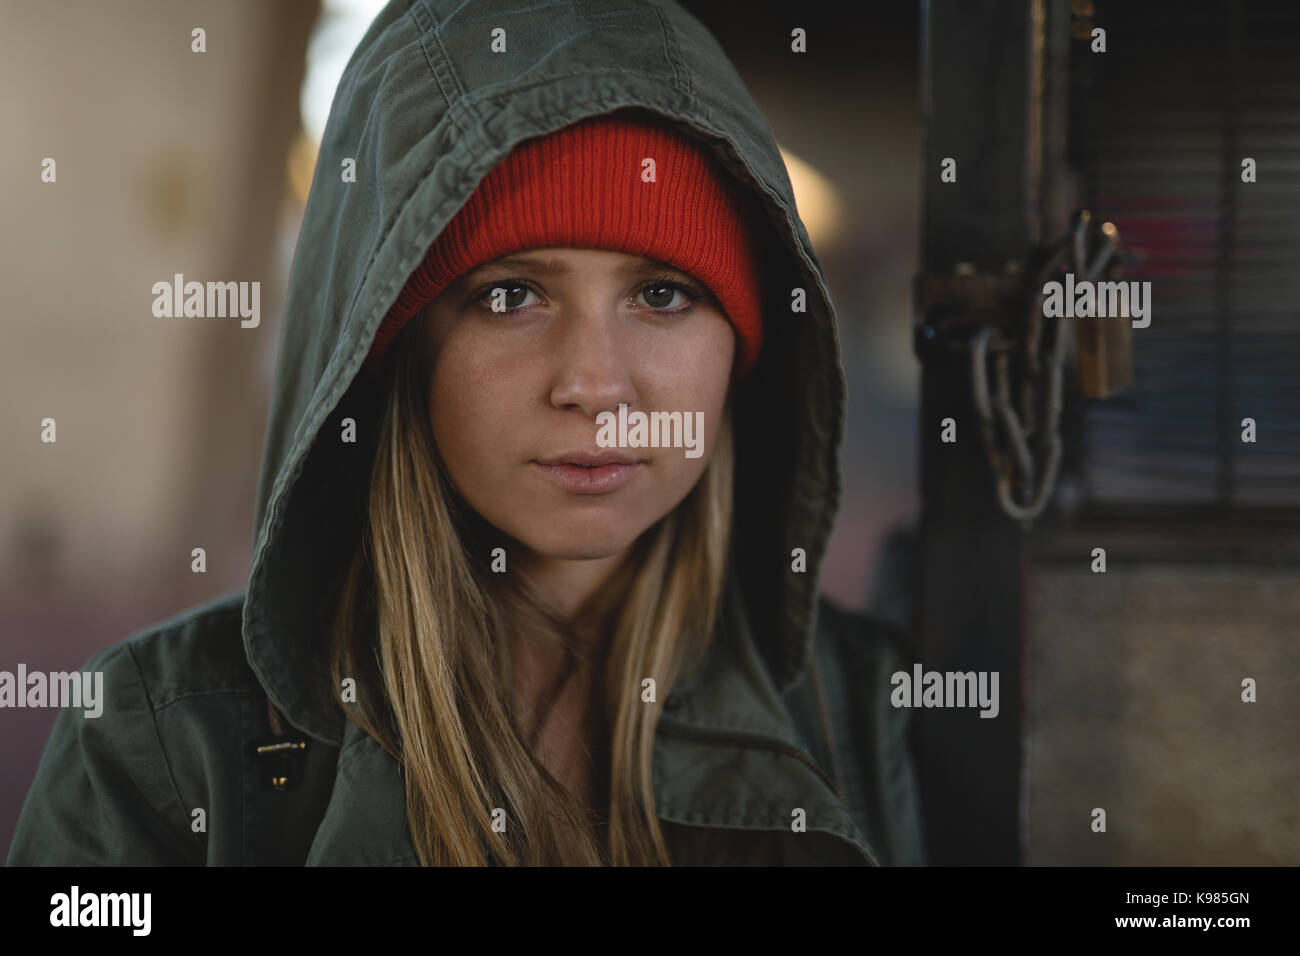 Close-up portrait of young woman in hooded jacket Stock Photo